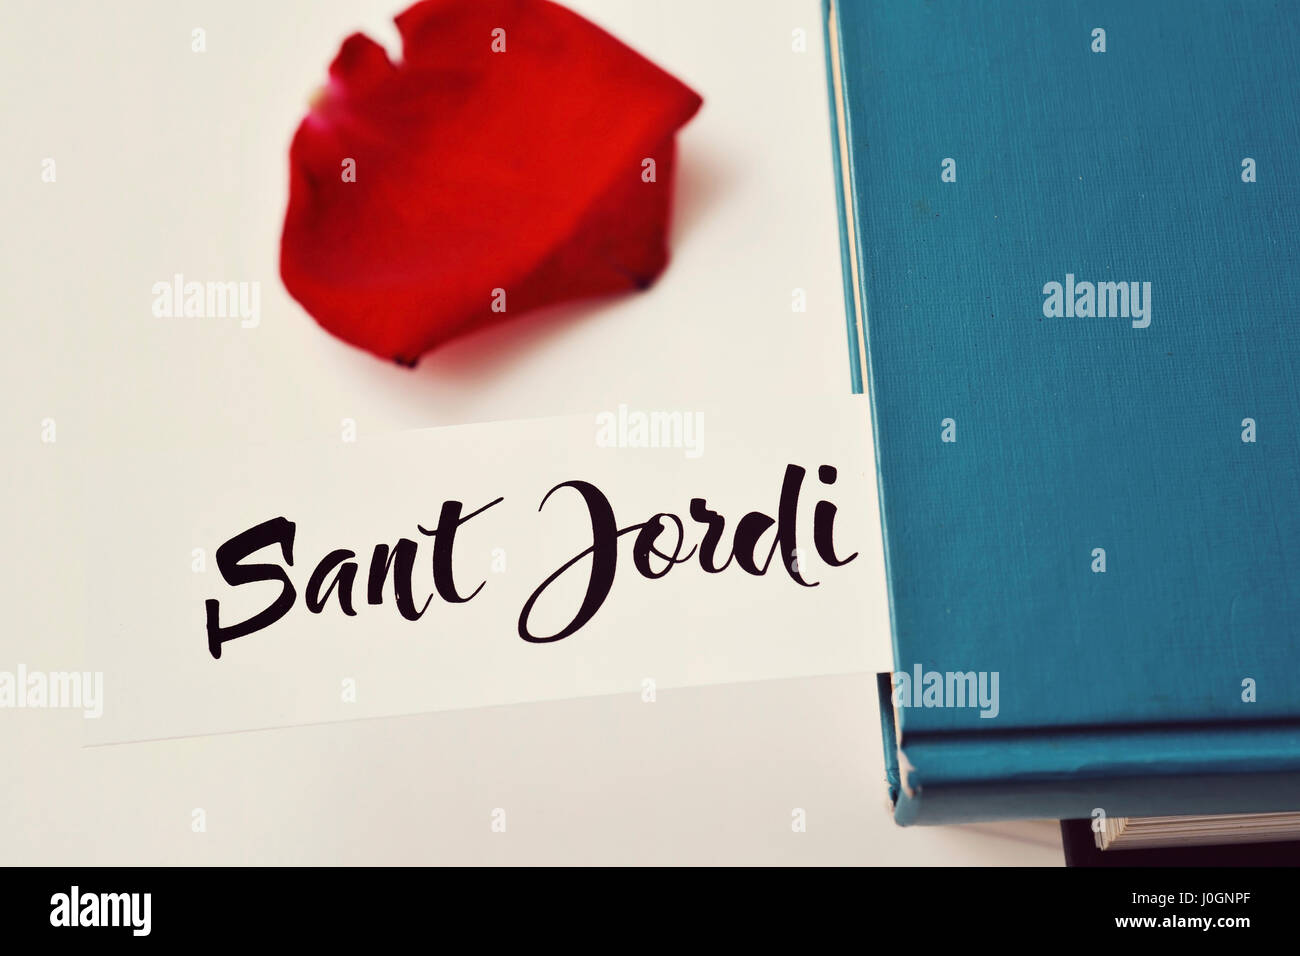 a red rose petal, a pile of books and the text Sant Jordi, the Catalan name for Saint Georges Day, when it is tradition to give red roses and books in Stock Photo